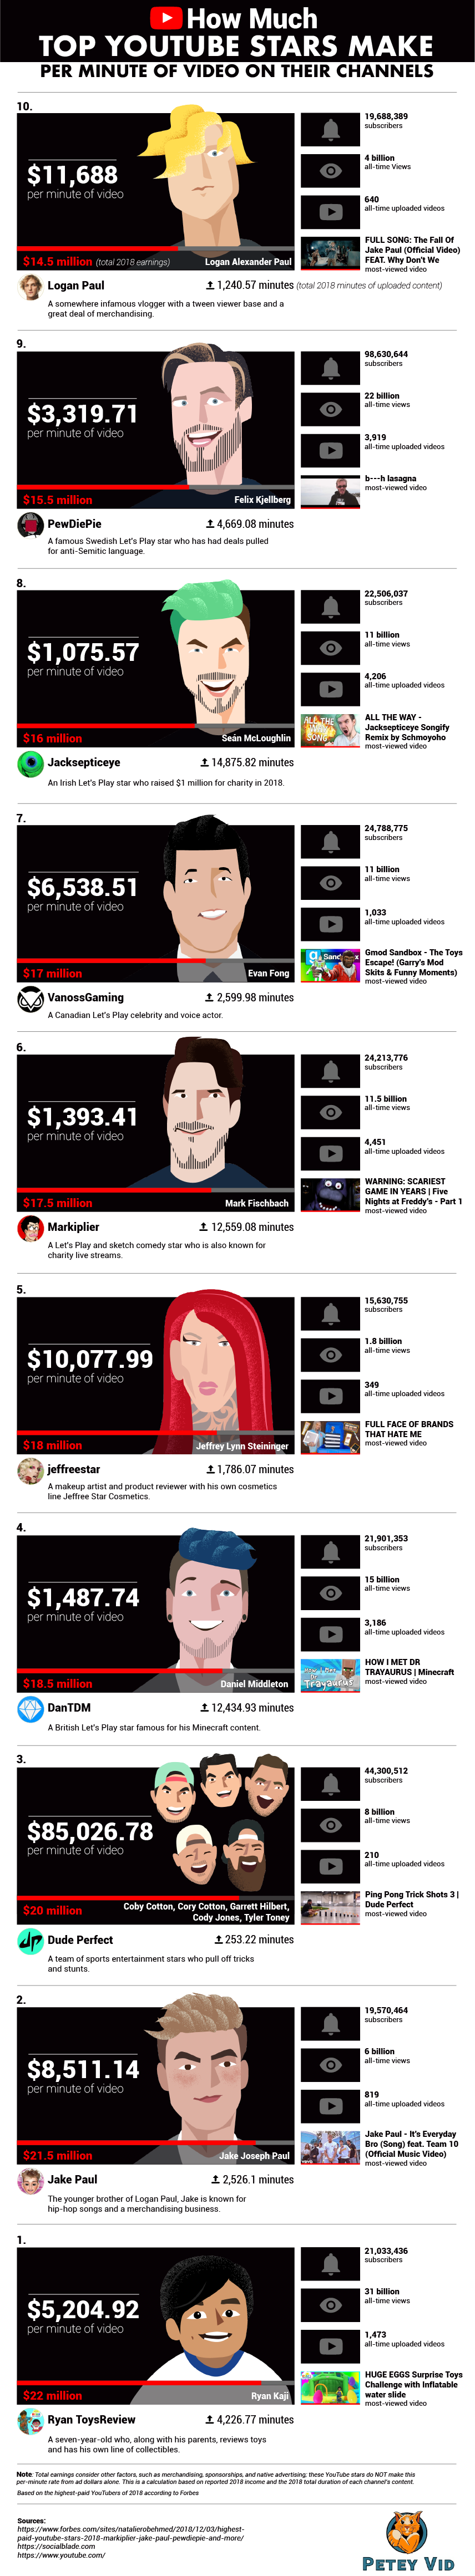 How Much Top YouTube Stars Make Per Minute of Video